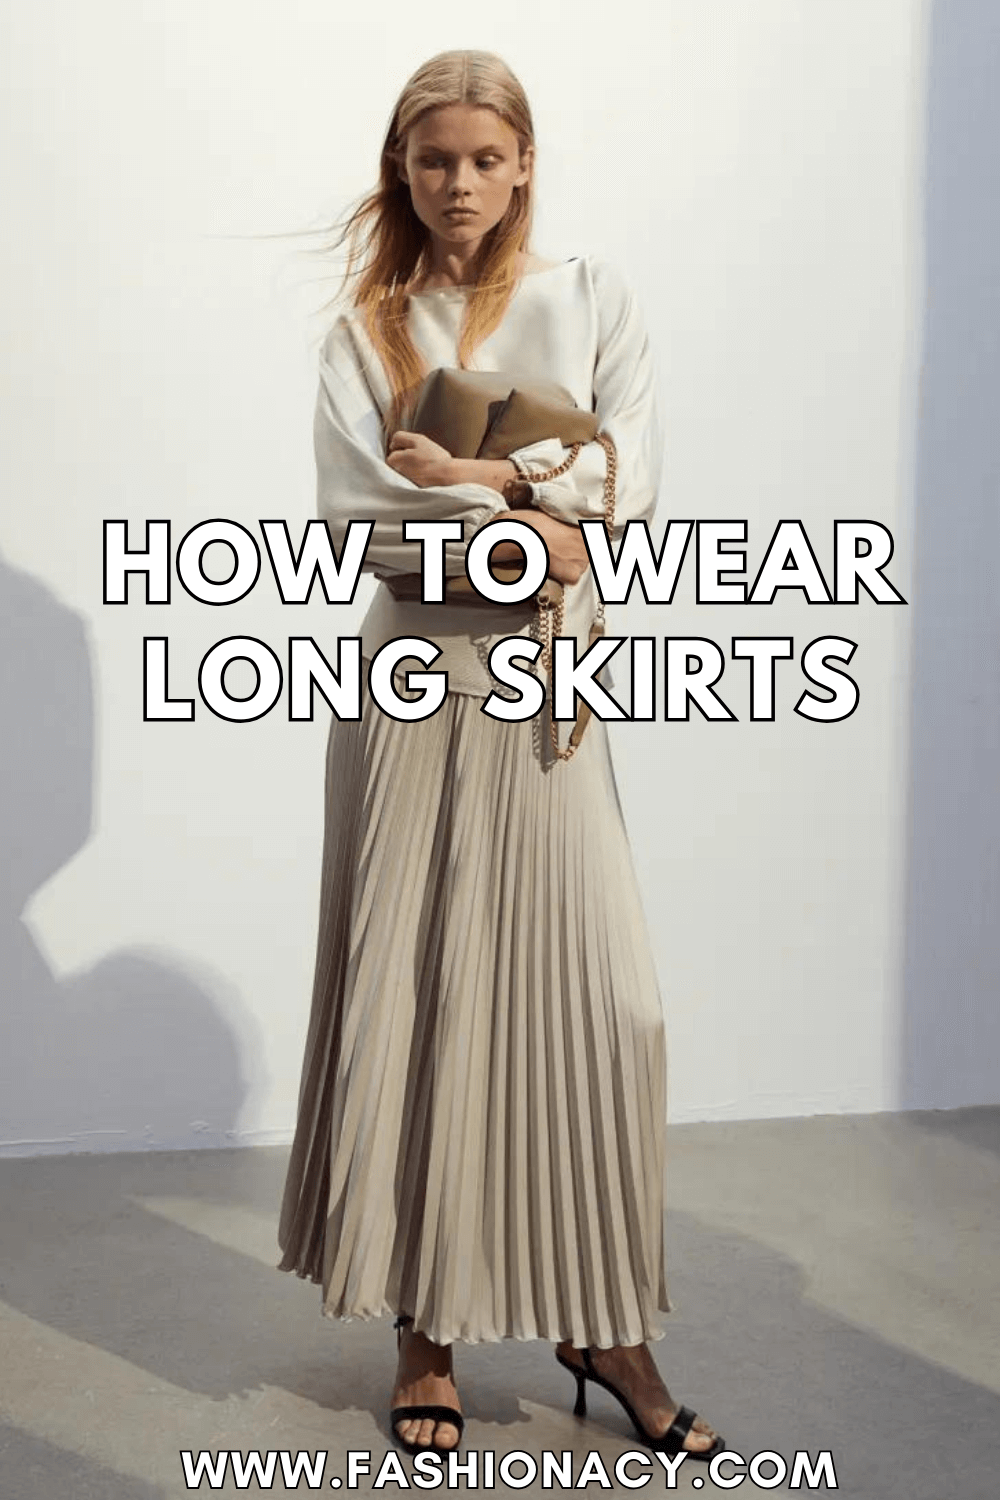 How to Wear Long Skirts